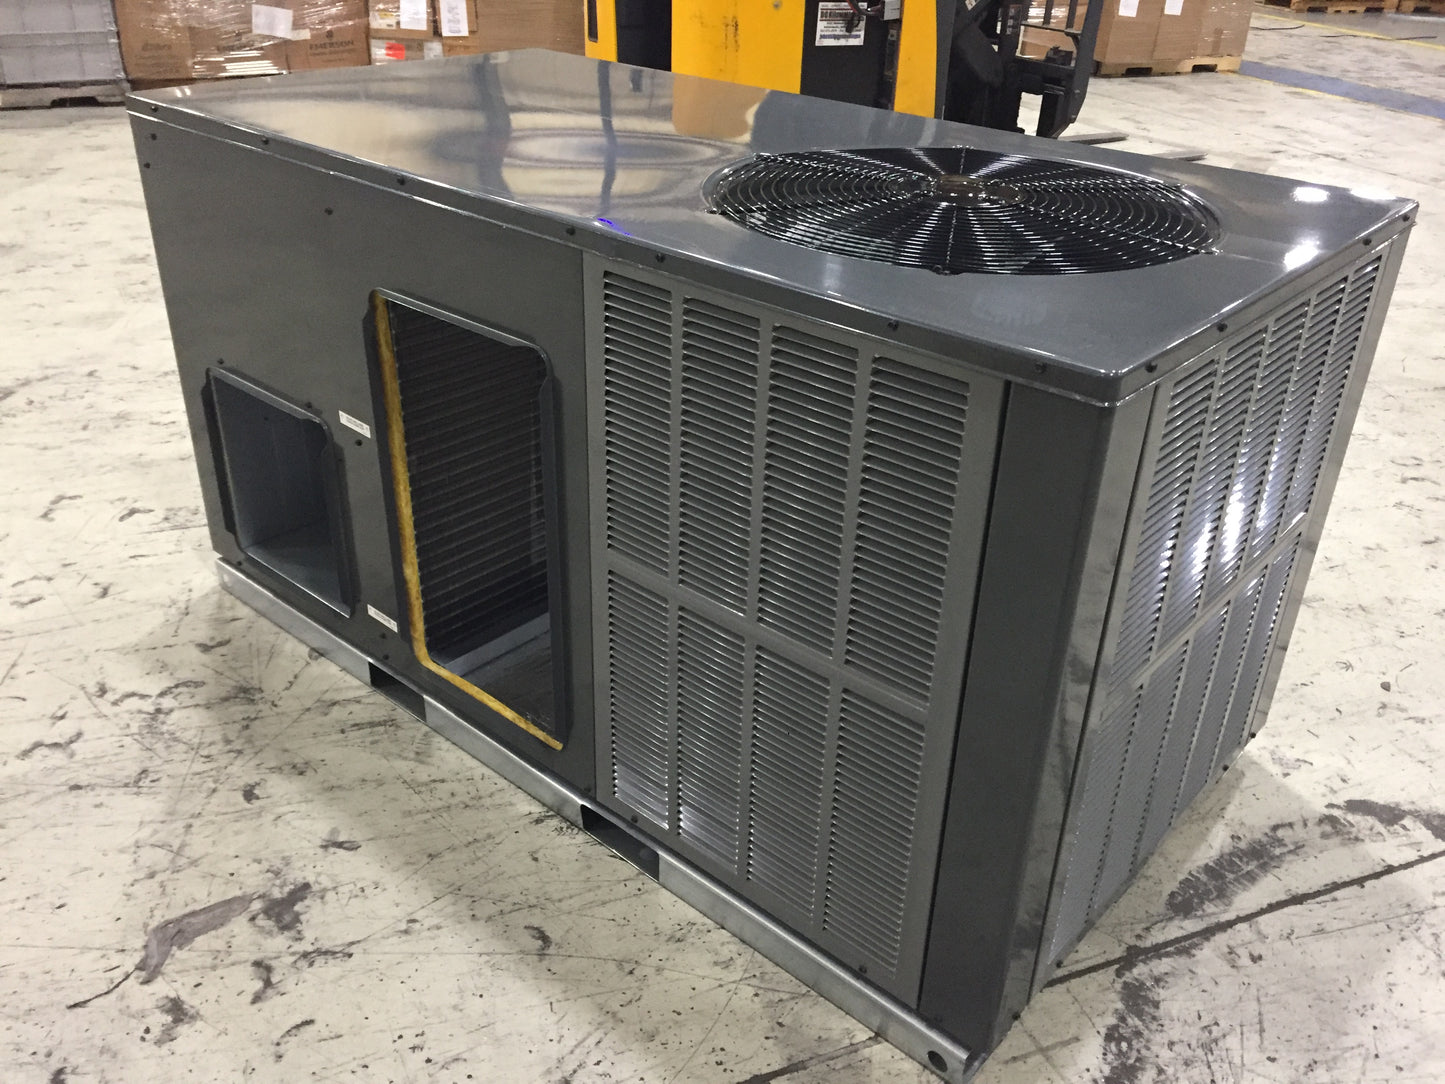 4 TON HORIZONTAL PACKAGED AIR CONDITIONING UNIT, 13.4 SEER, 208-230/60/1, R401A